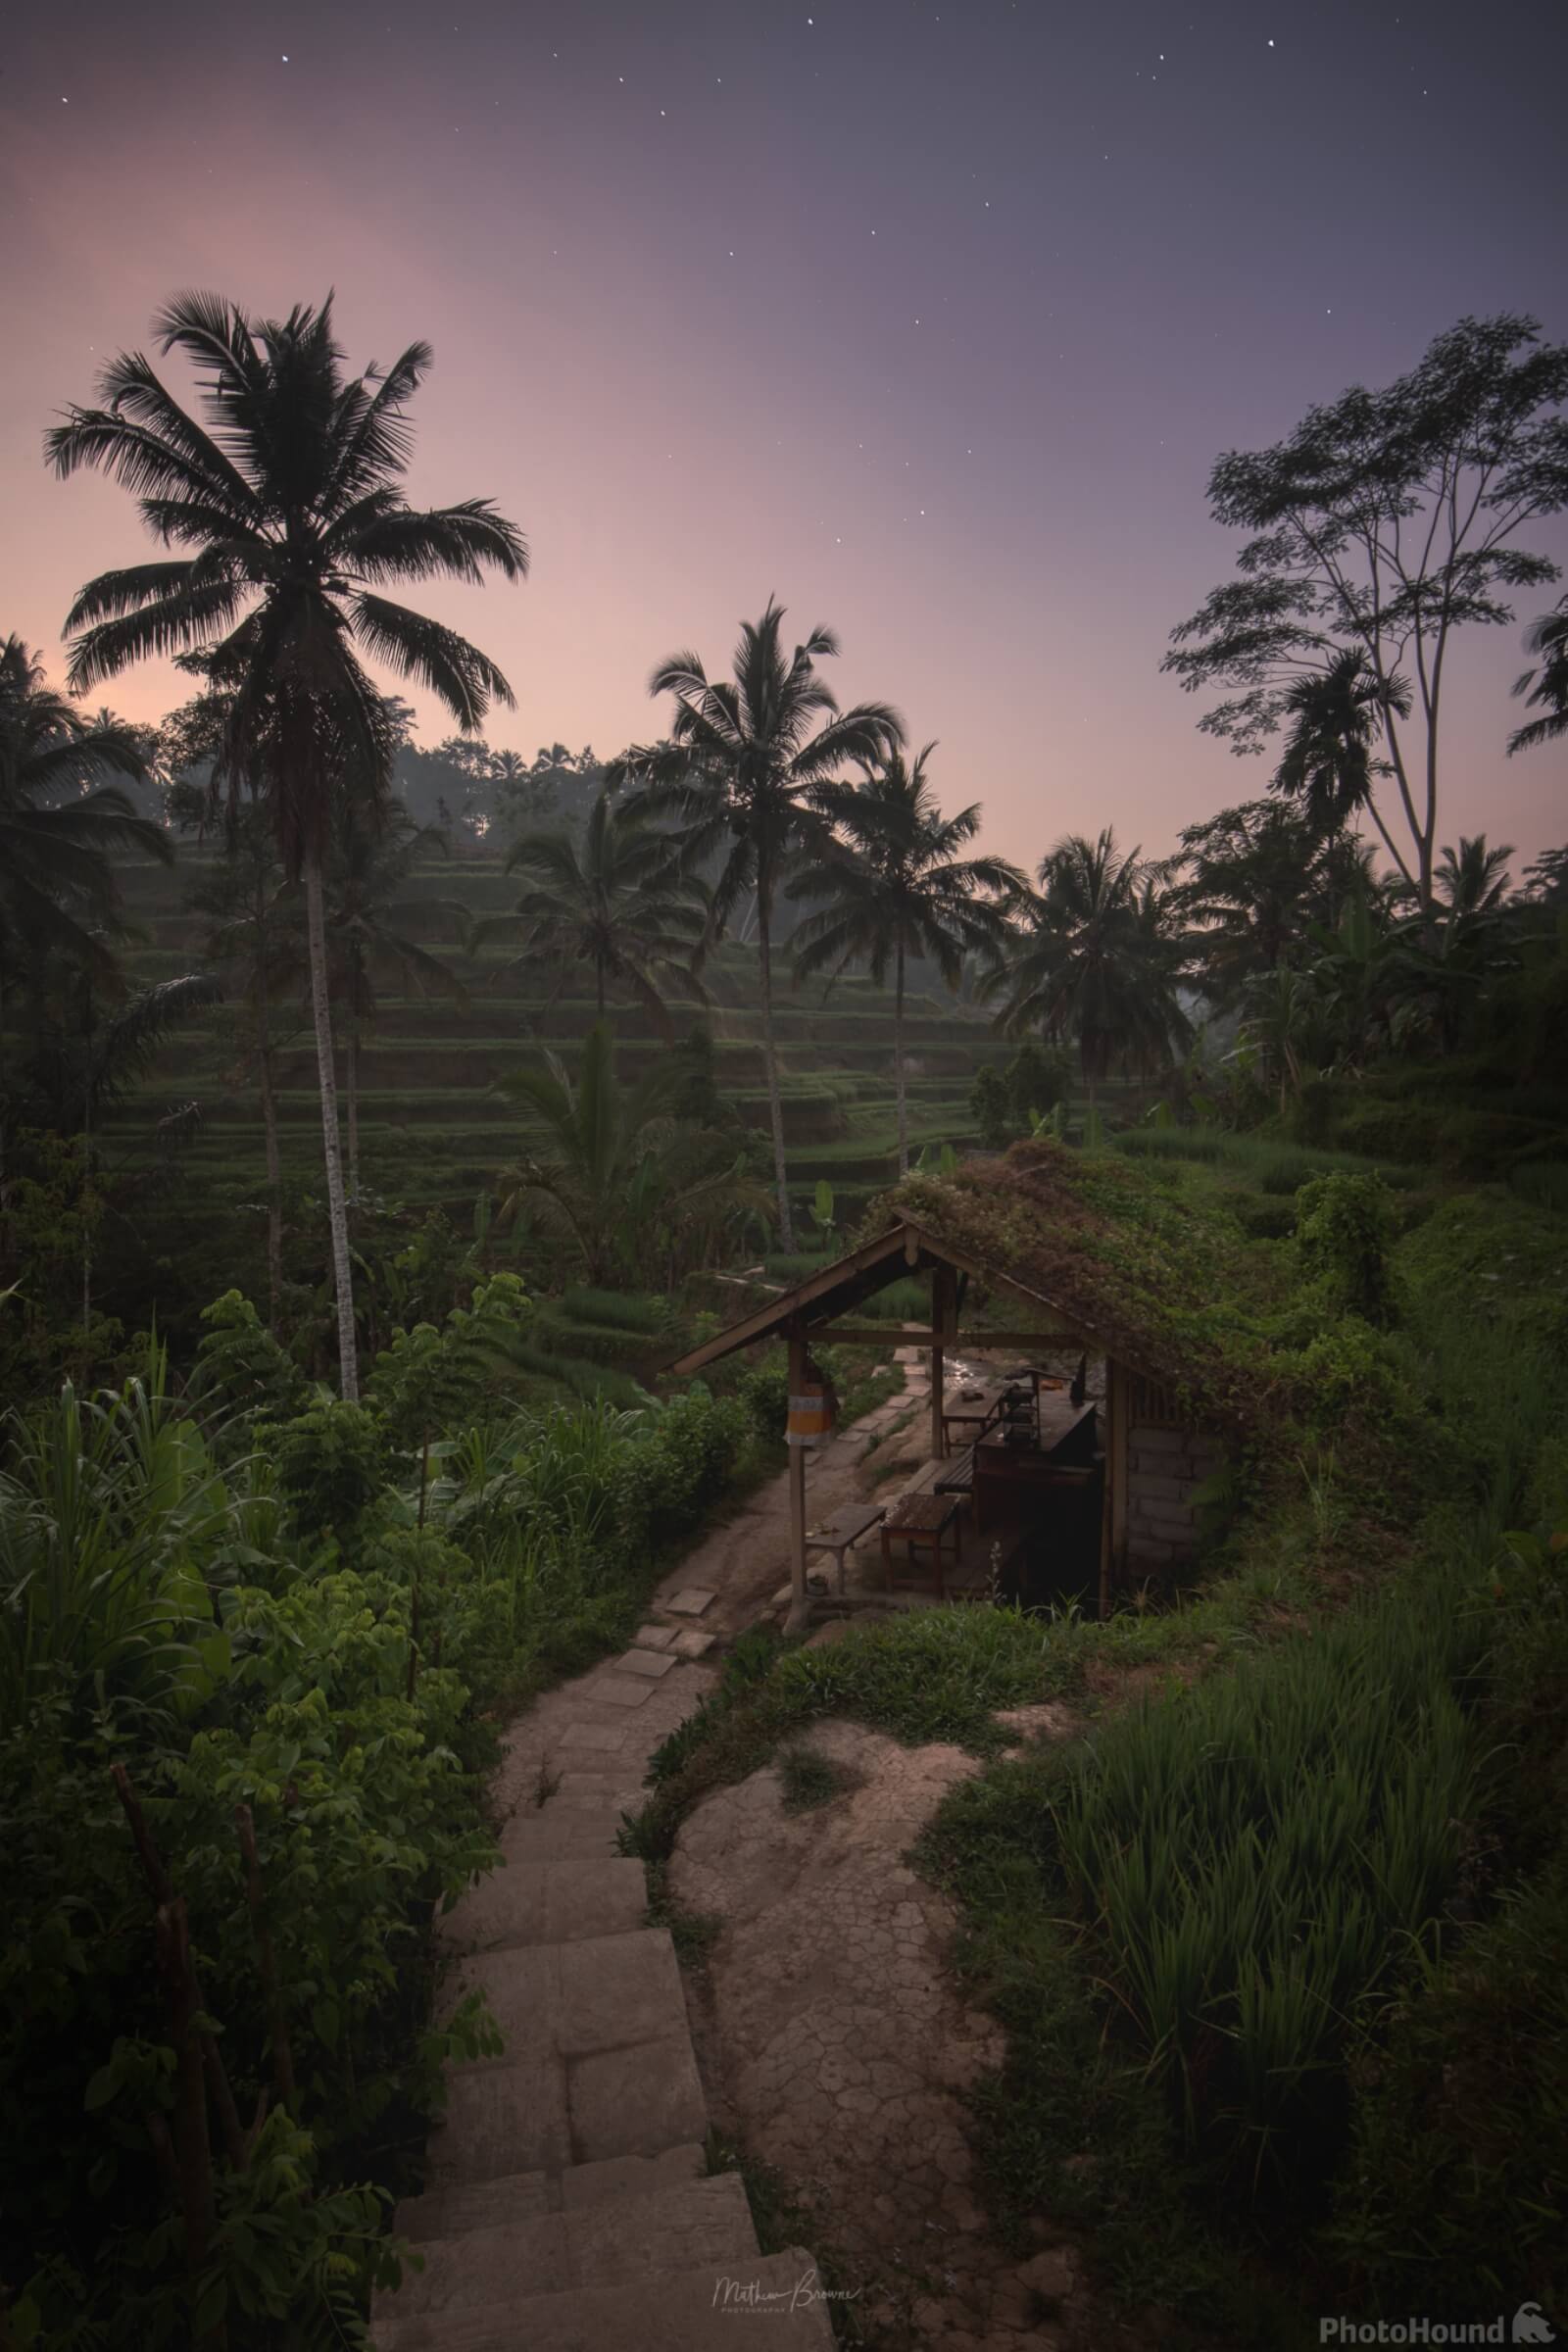 Image of Tegallalang Rice Terraces by Mathew Browne